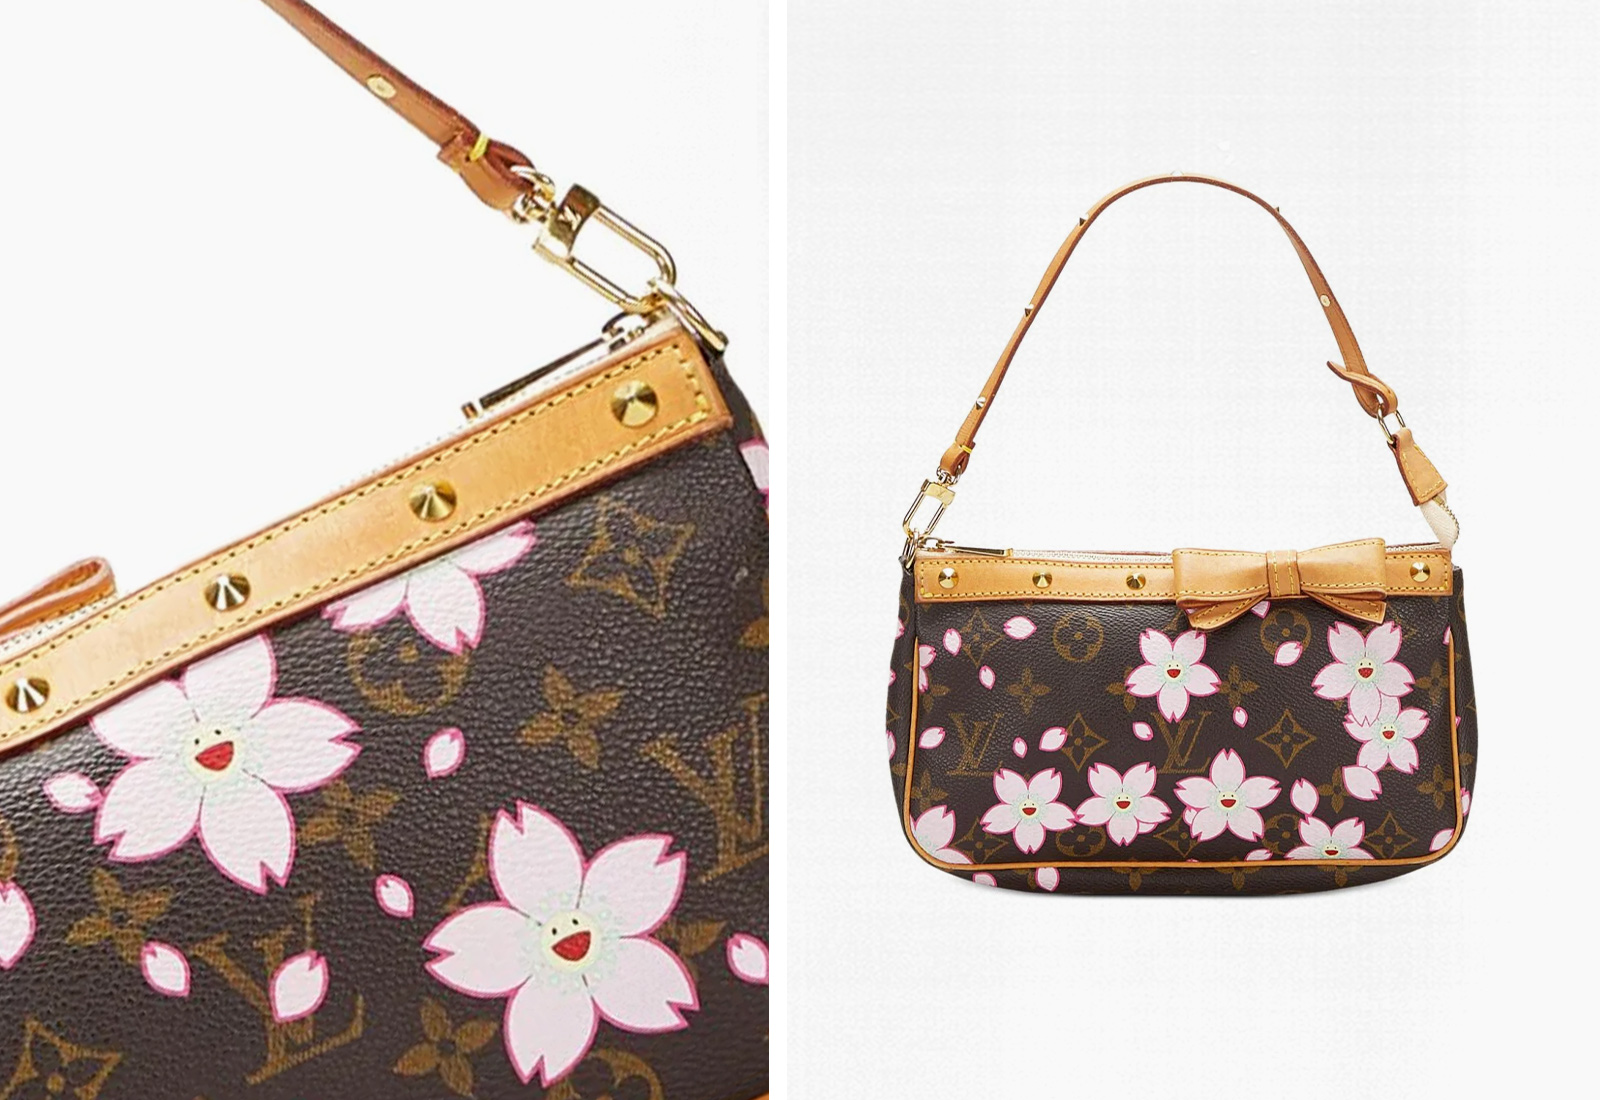 Introducing Louis Vuitton Nano: Your Favorite LV Bags, Now in Tiny